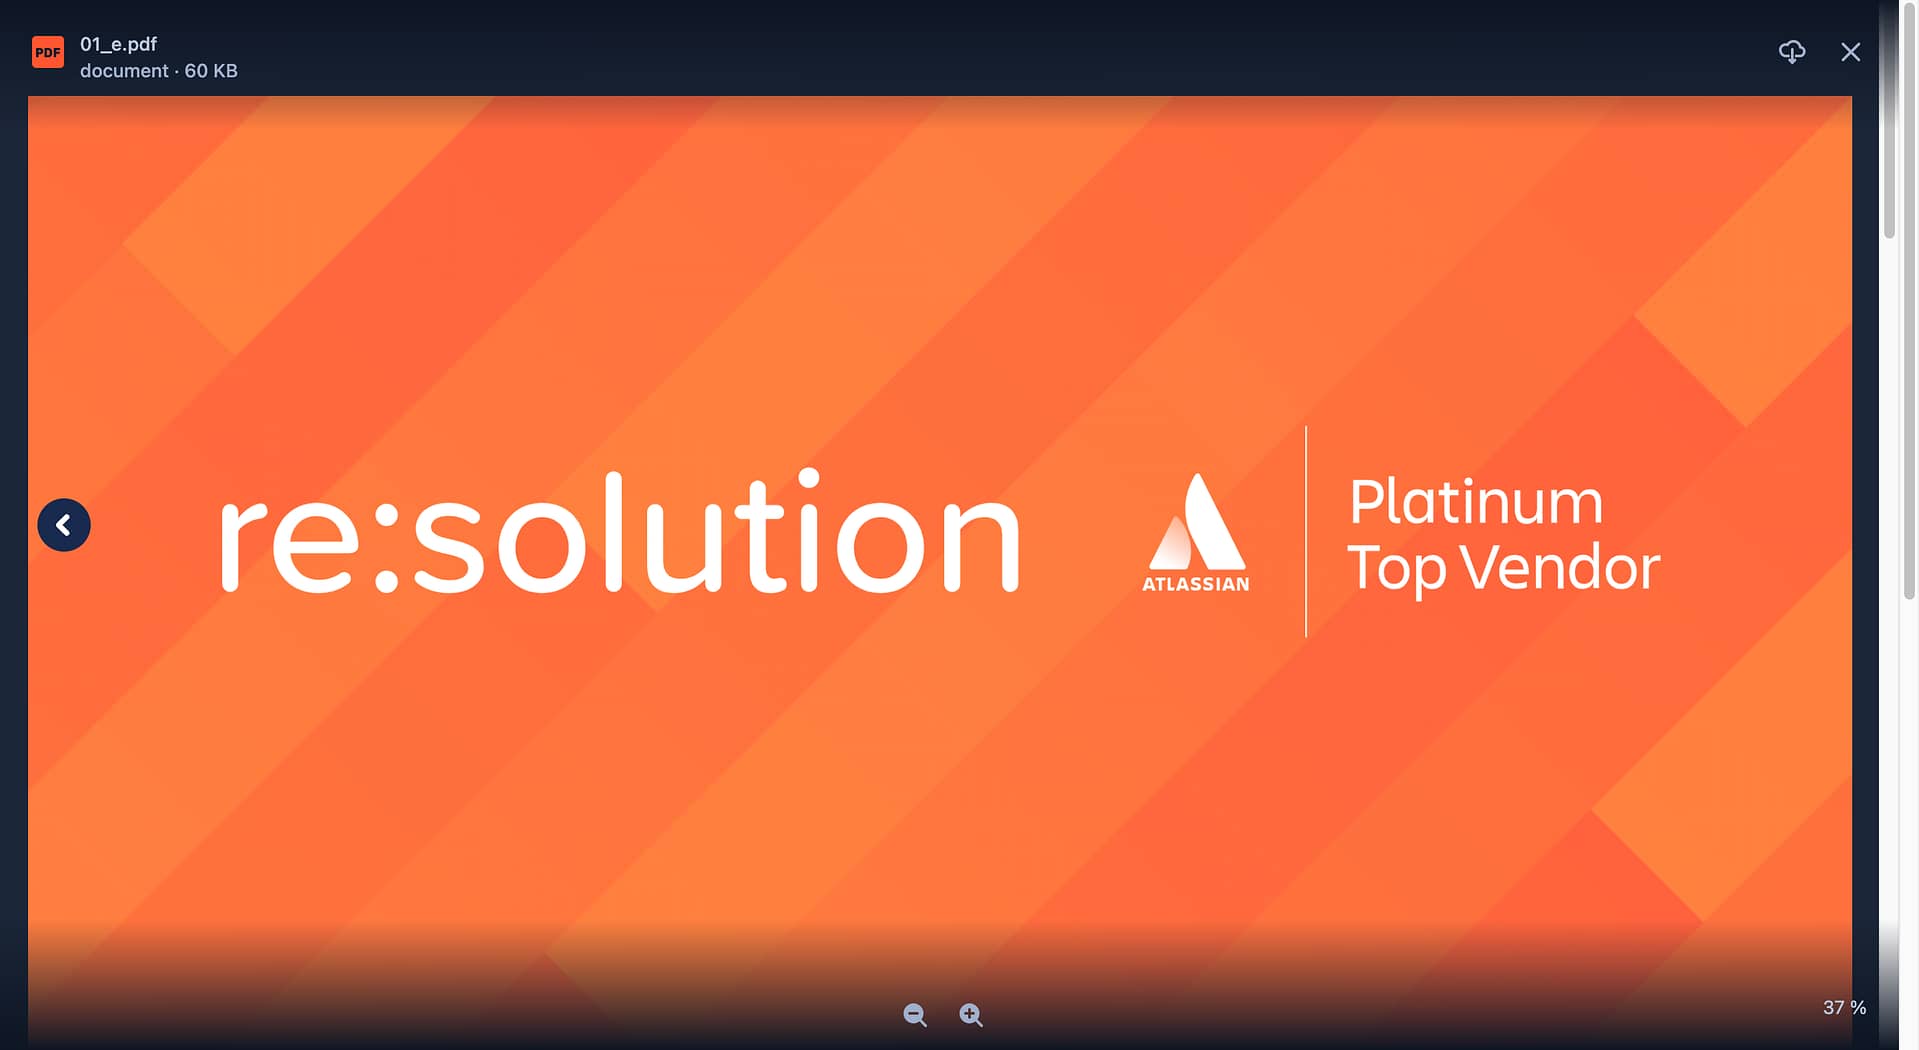 resolution embed pdf in Confluence